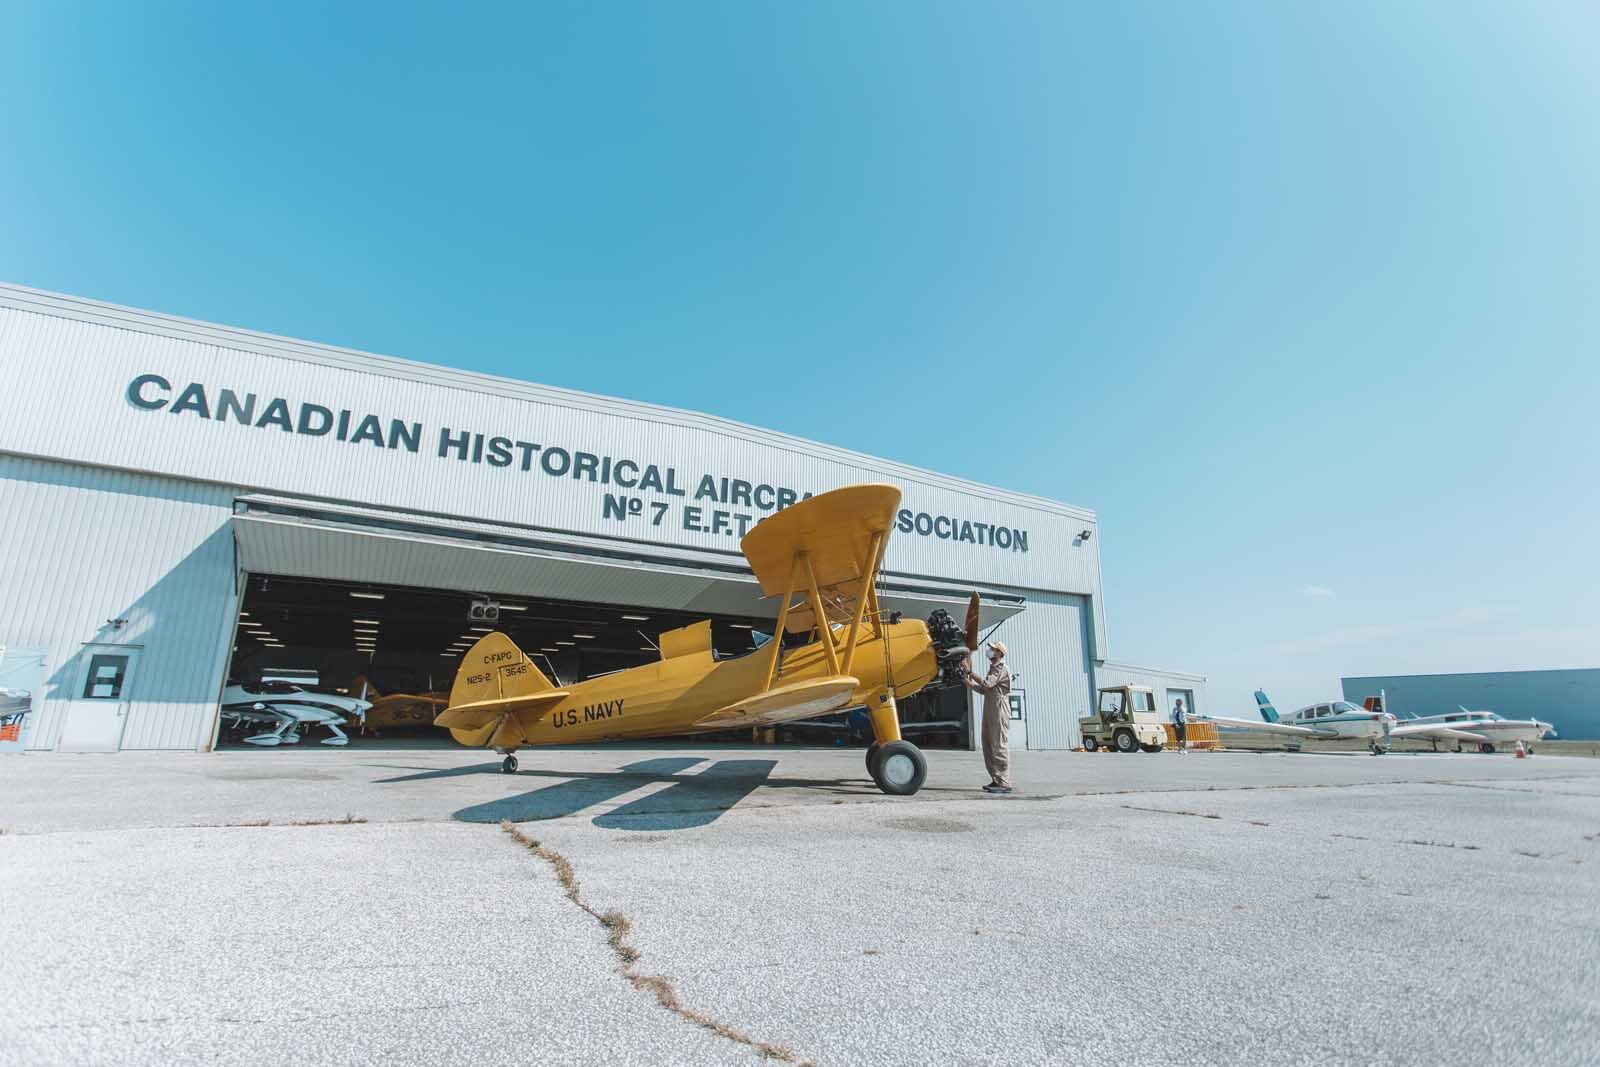 Best things to do in Windsor Ontario Canadian Aviation Museum